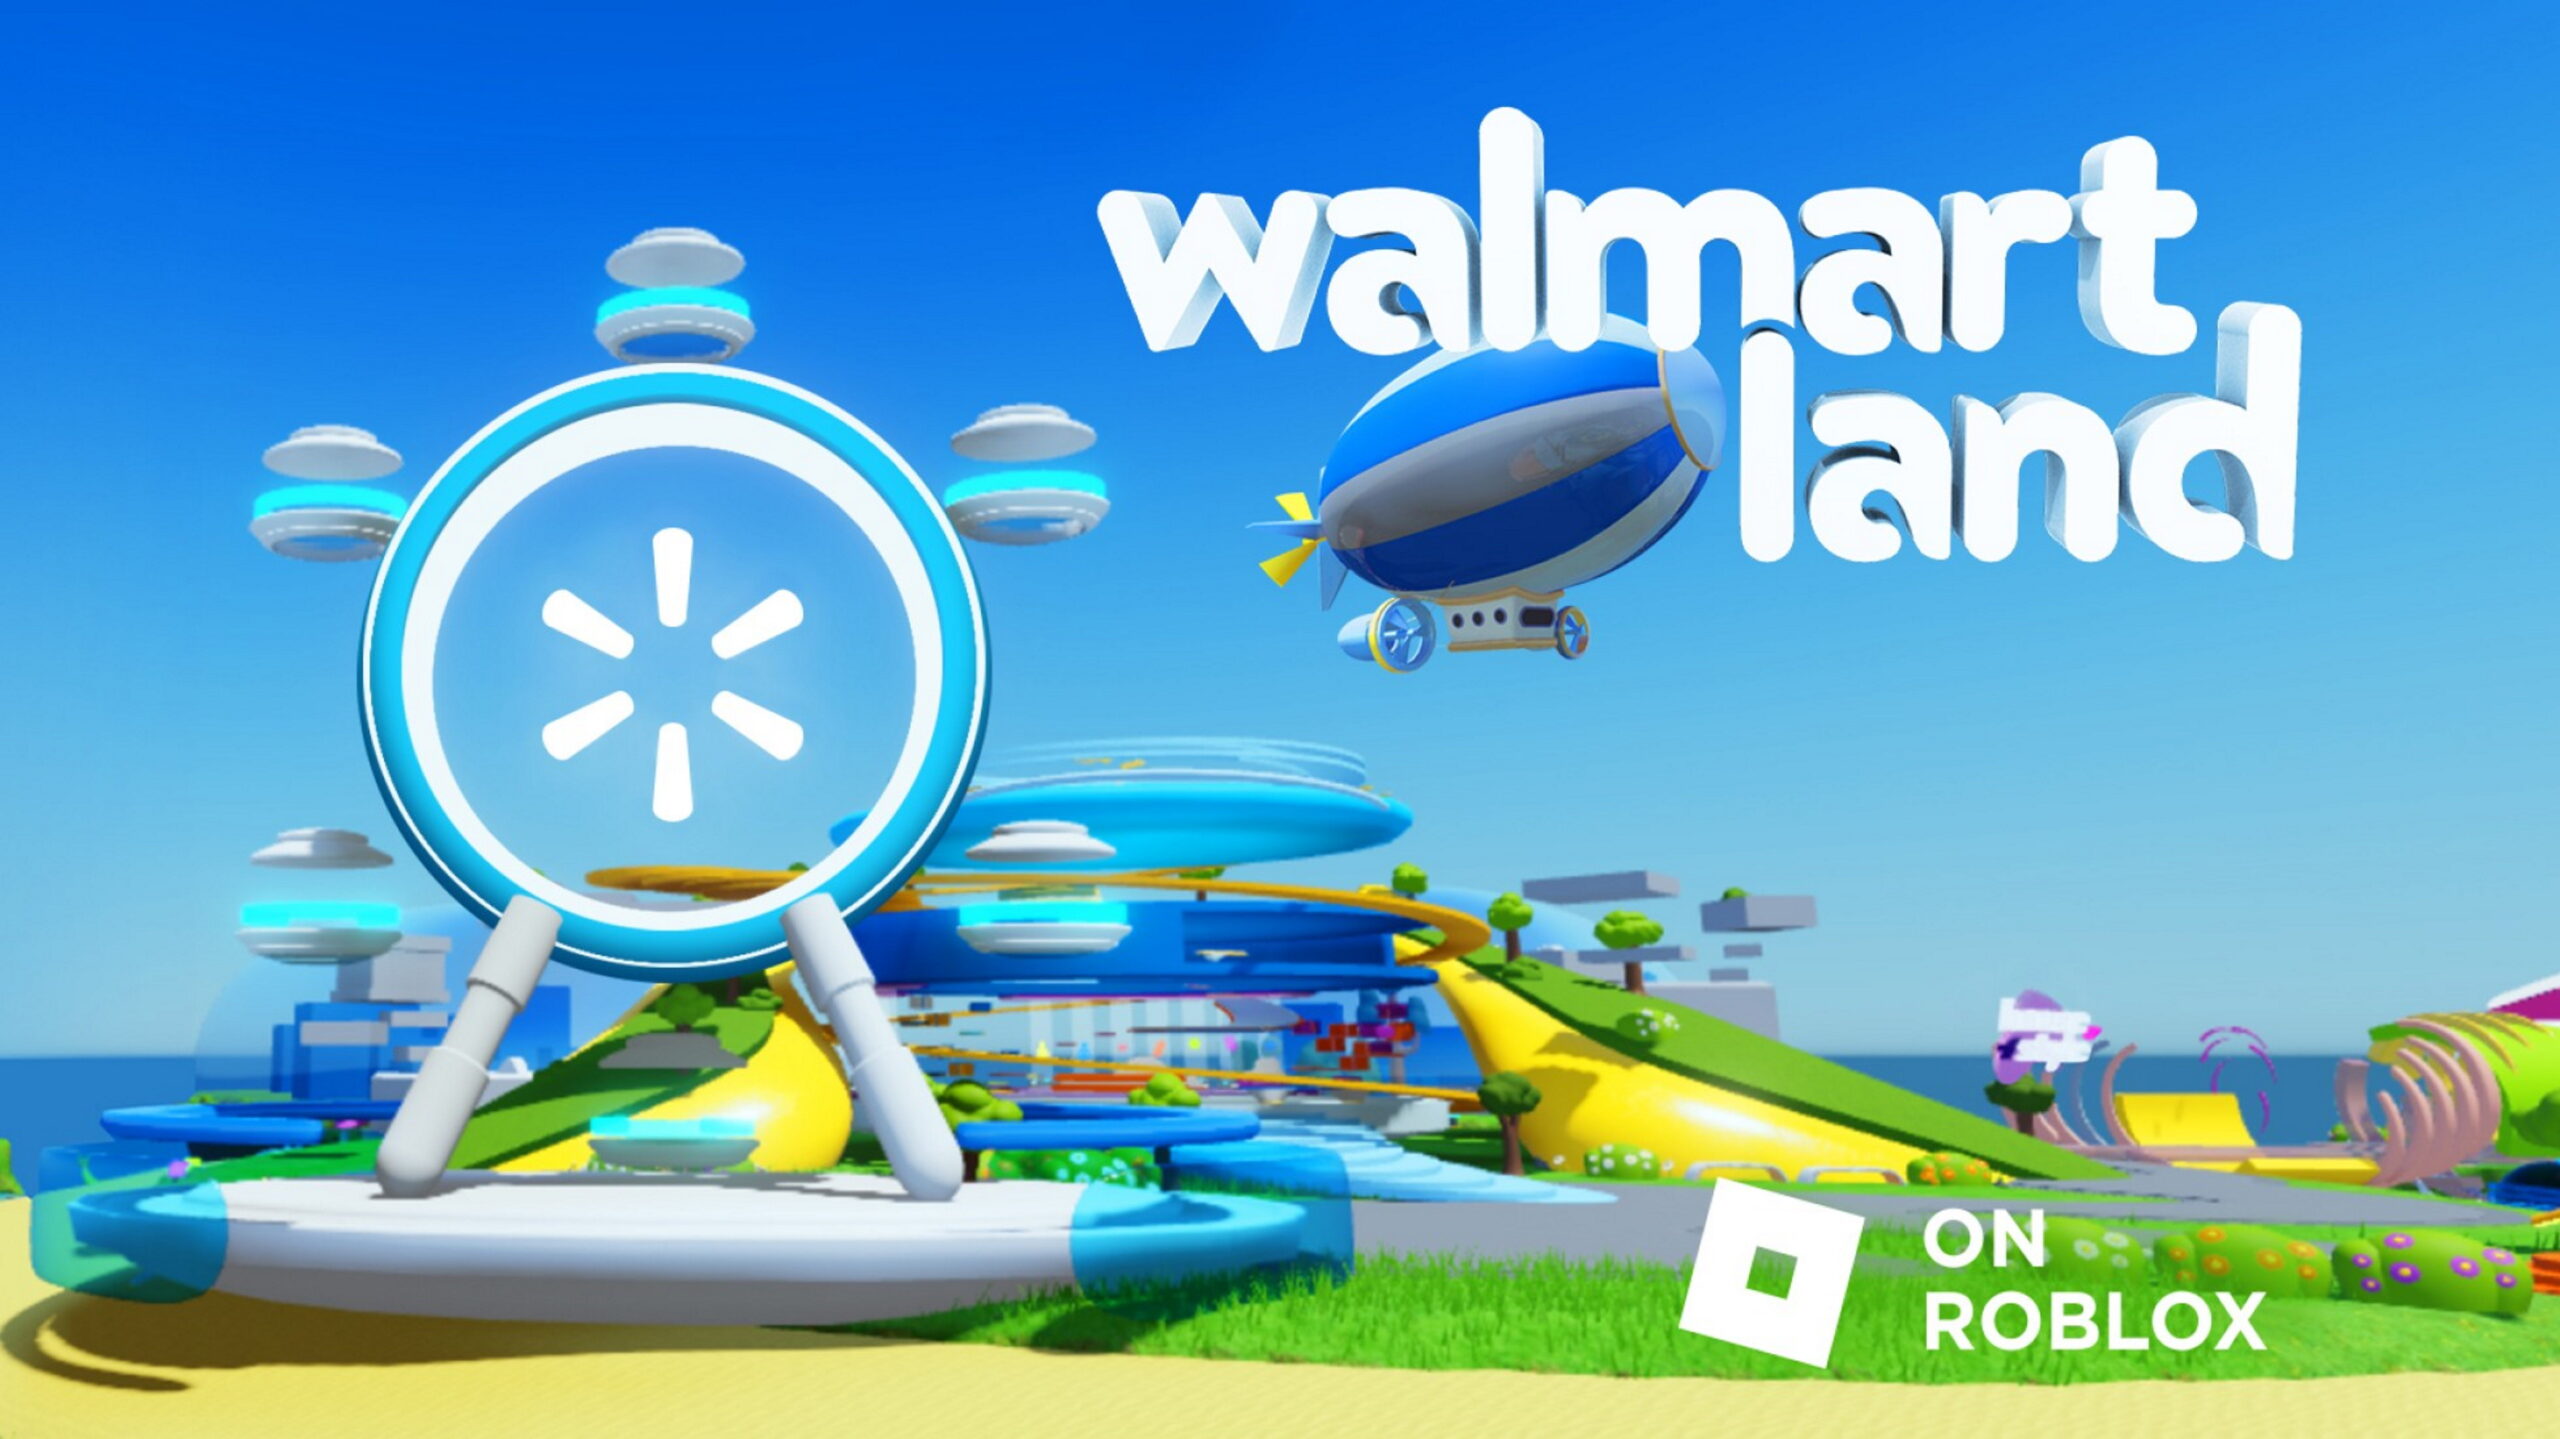 ‘Hey everyone,’ says Walmart executive to the single person in its new Roblox metaverse nightmare